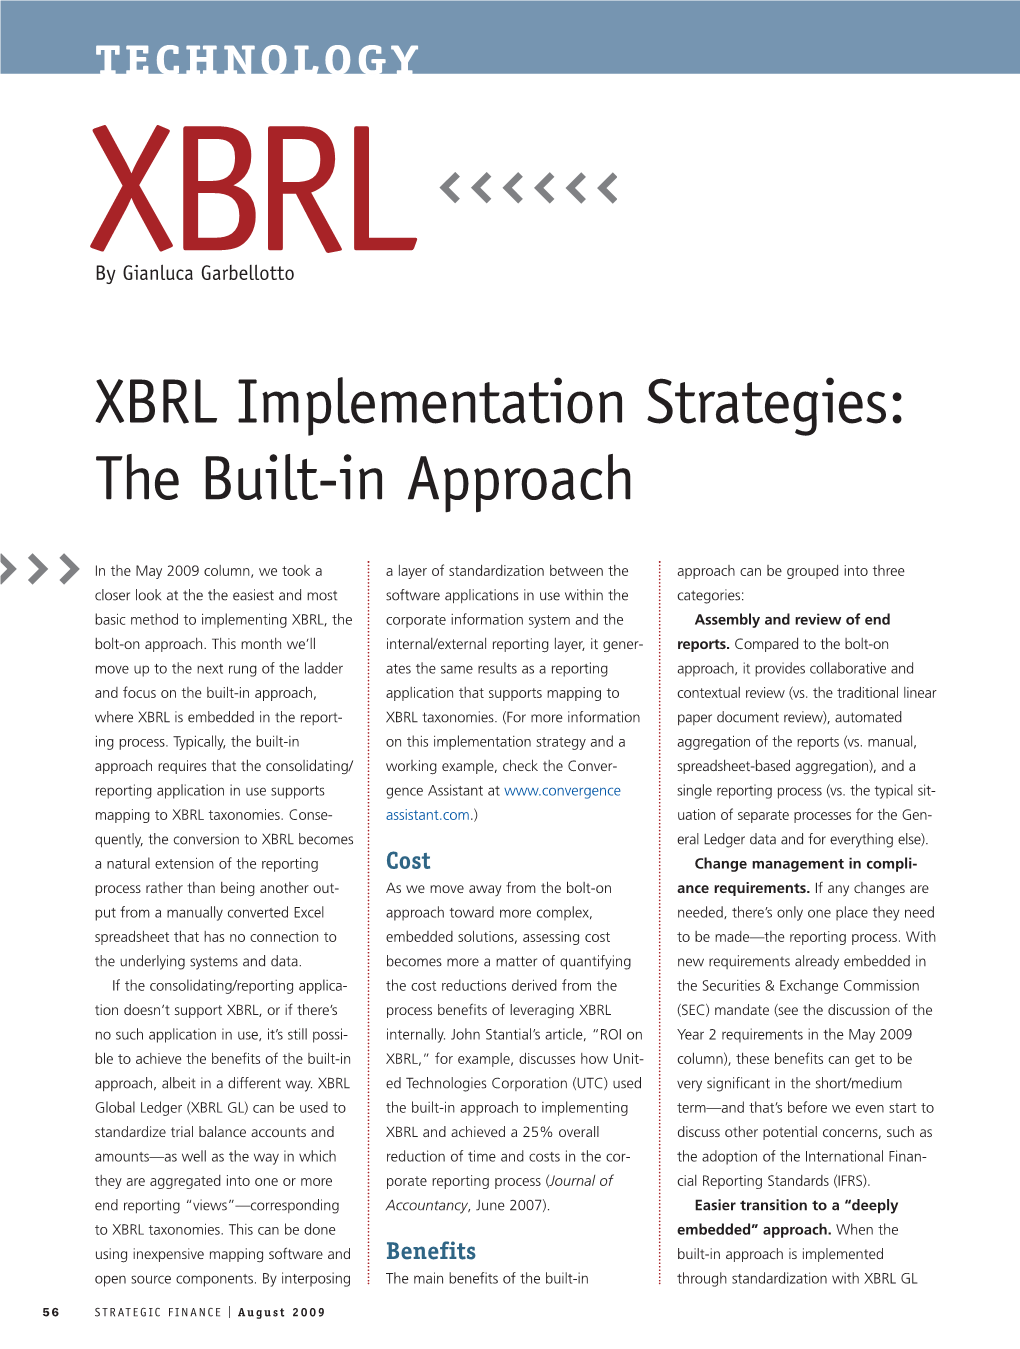 XBRL Implementation Strategies: the Built-In Approach